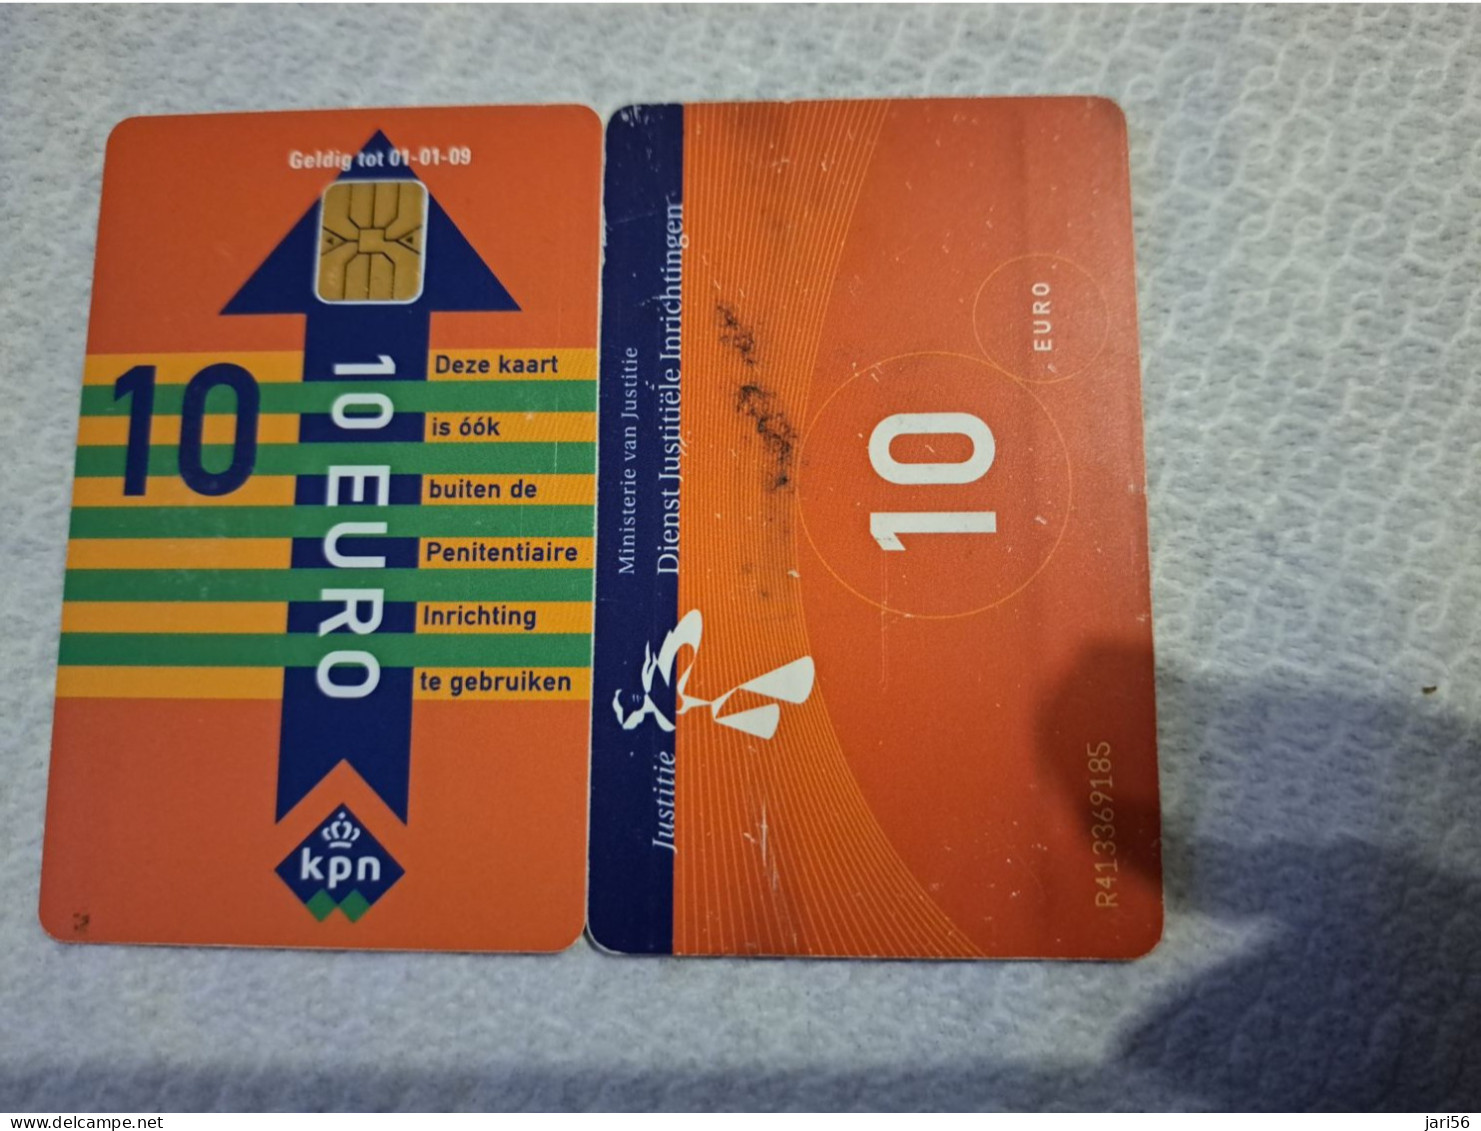 NETHERLANDS   € 10,-   / USED  / DATE  01-01-09  JUSTITIE/PRISON CARD  CHIP CARD/ USED   ** 16162** - [3] Sim Cards, Prepaid & Refills